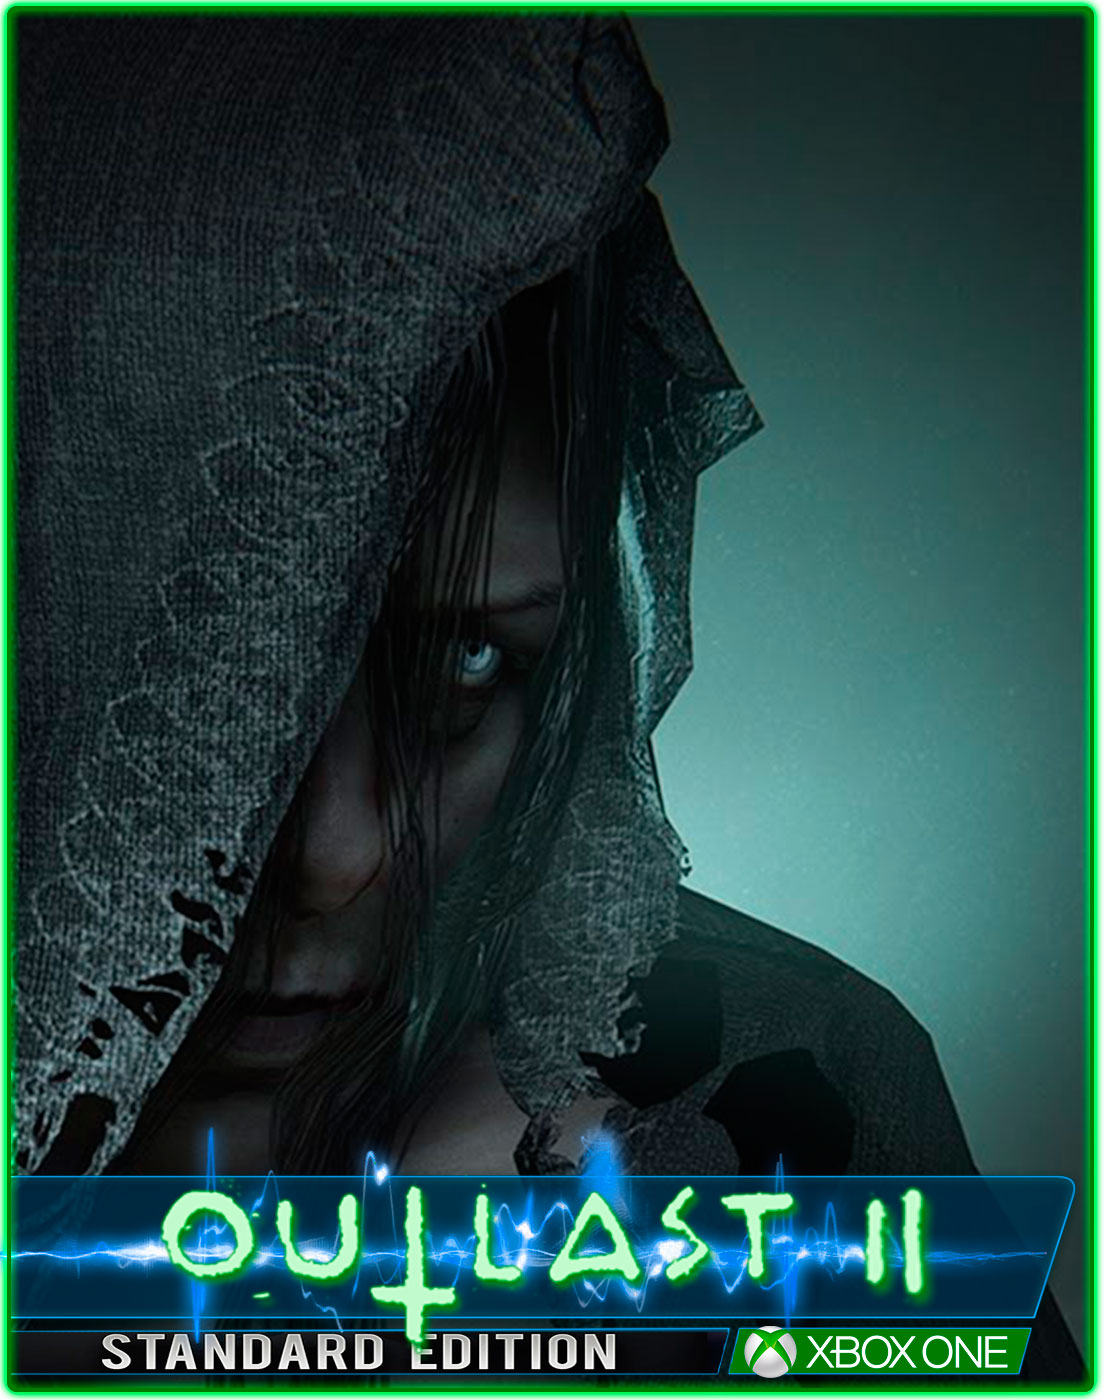 outlast 2 xbox store